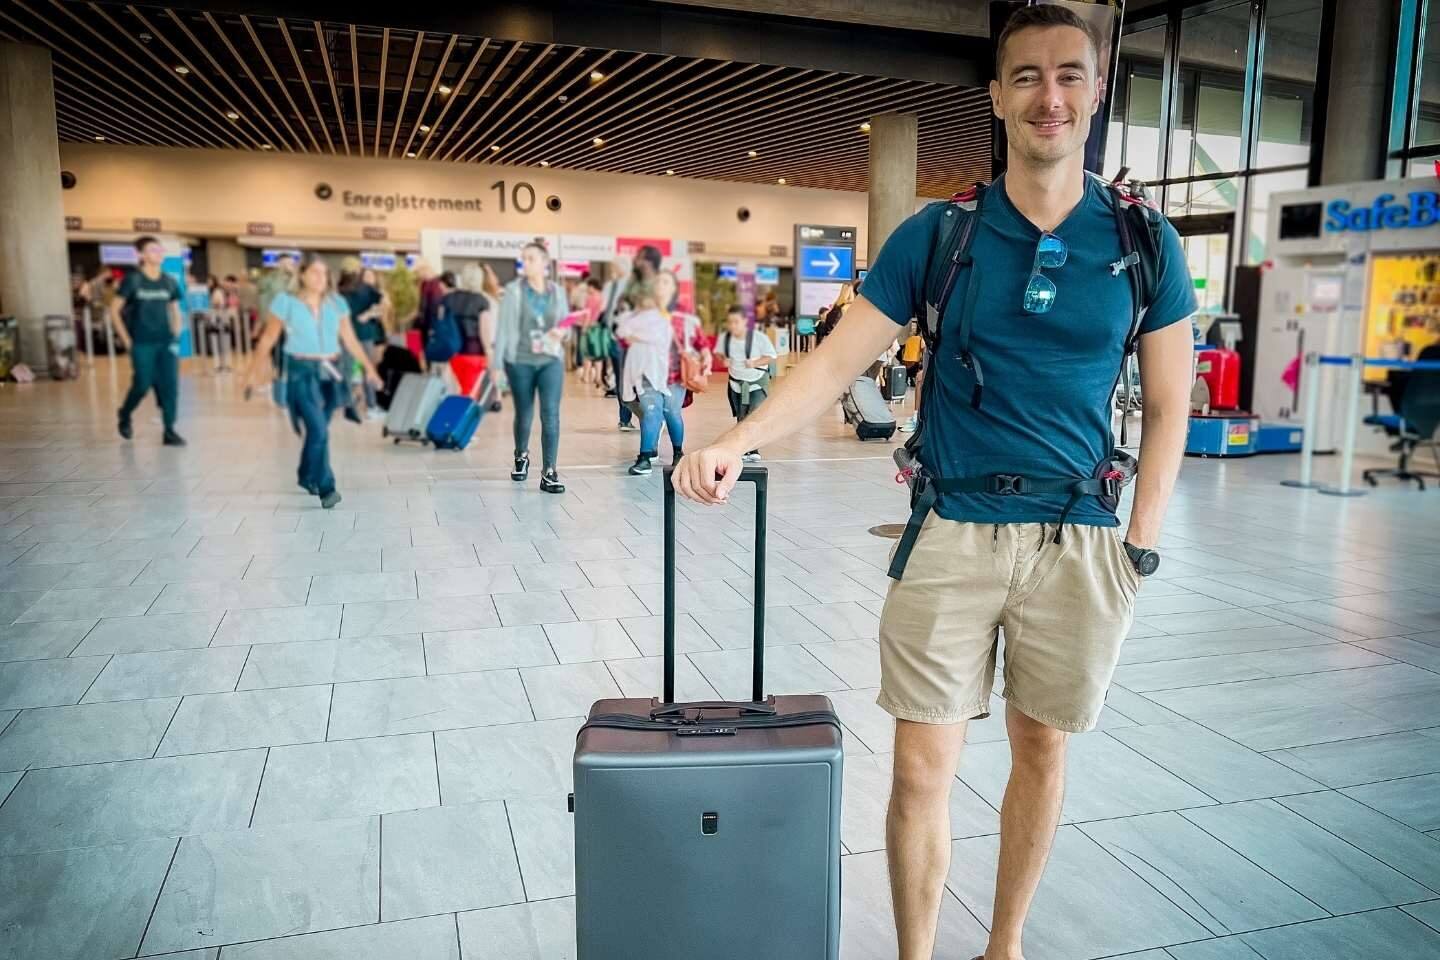 Founder of this blog testing out the level8 luggage